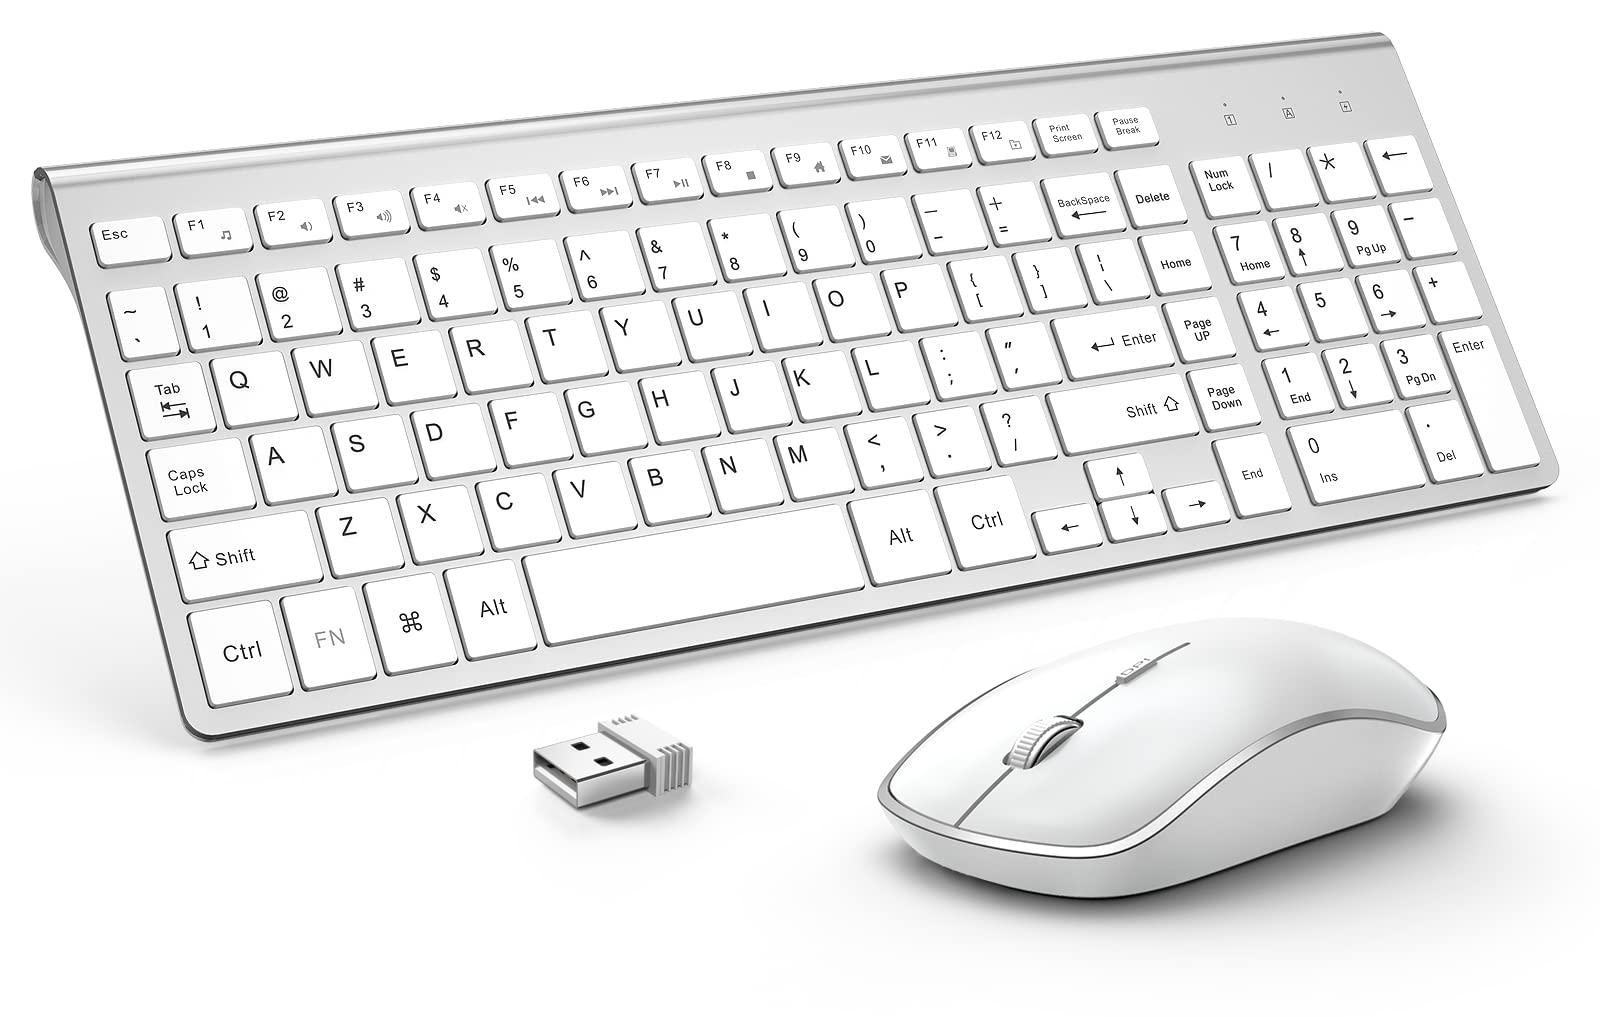 Wireless Keyboard and Mouse, J JOYACCESS USB Slim Wireless Keyboard Mouse with Numeric Keypad Compatible with iMac Mac PC Laptop Tablet Computer Windows (Silver White)Wireless Mouse for Laptop，with USB Nano 2400 DPI Portable Mobile Optical Cordless Mouse Mice for Laptop (Silver+White)
